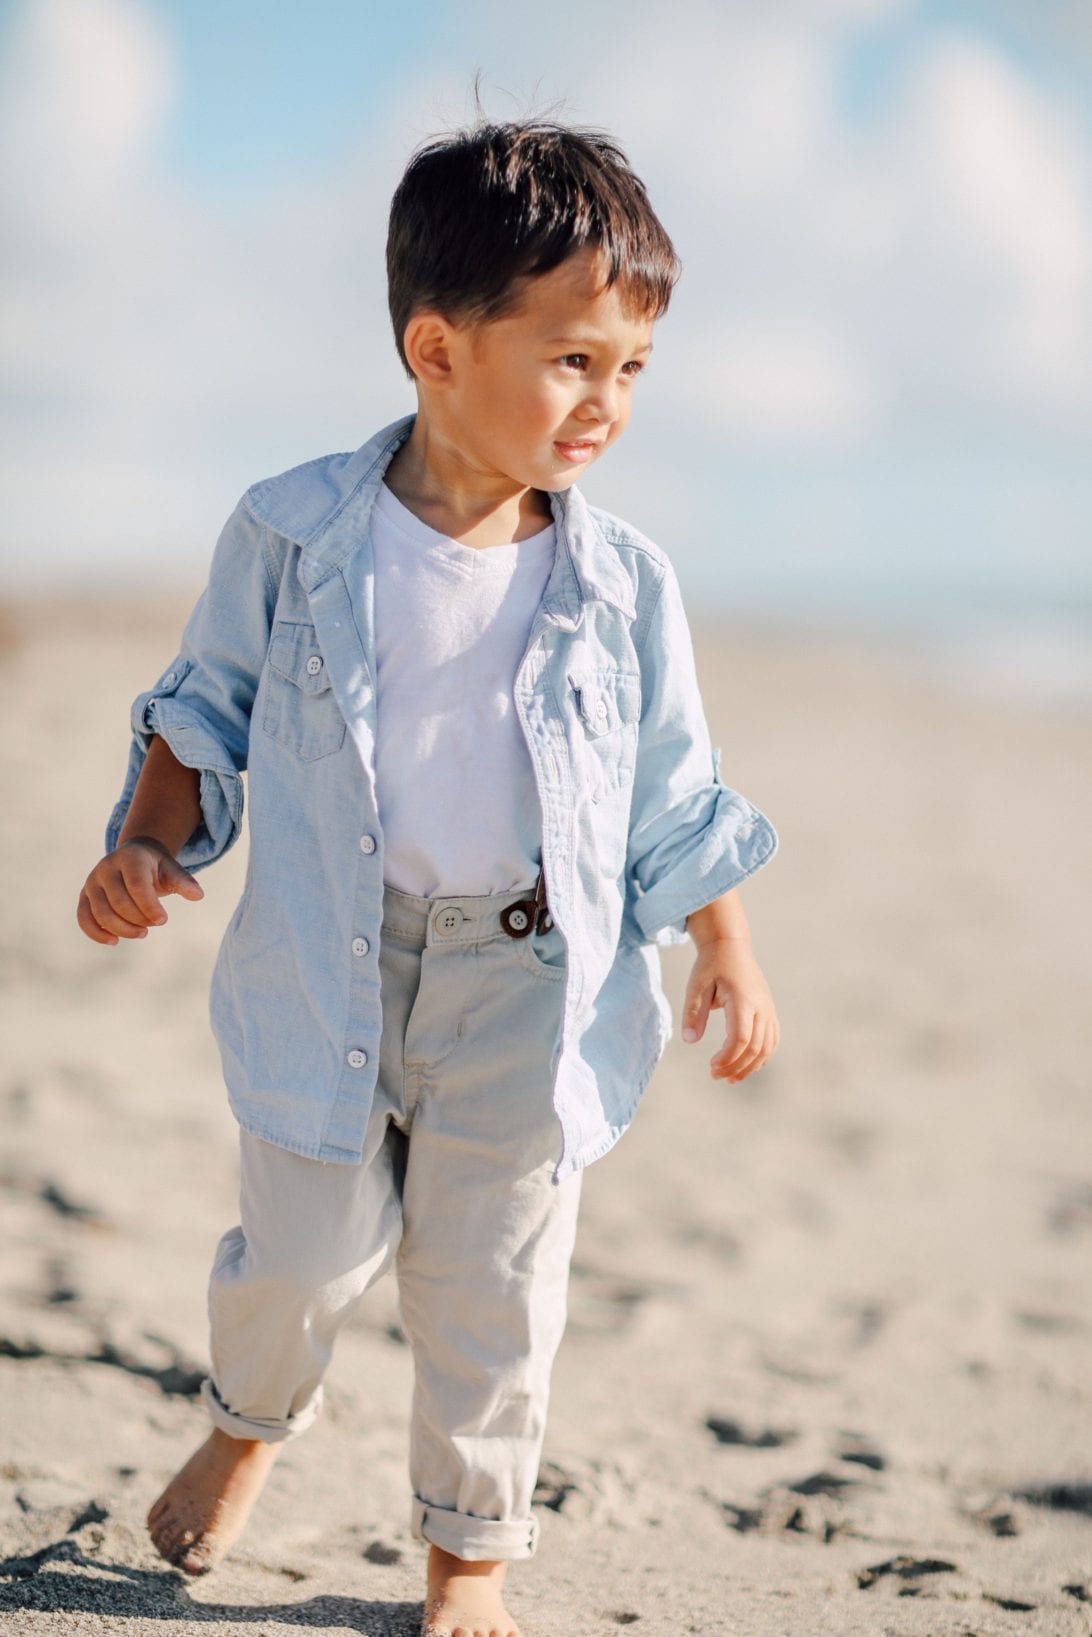 MOMMY AND ME, MOMMY AND SON, BOY MOM, LETTER TO MY SON, FAMILY BEACH PHOTOGRAPHY, FAMILY PHOTOGRAPHY, FAMILY LIFESTYLE PHOTOGRAPHY, HIGH LOW MAXI DRESS, AGACI, OLD NAVY, BOY STYLE, TODDLER BOY STYLE, TASSLE EARRINGS, FAMILY VACATION